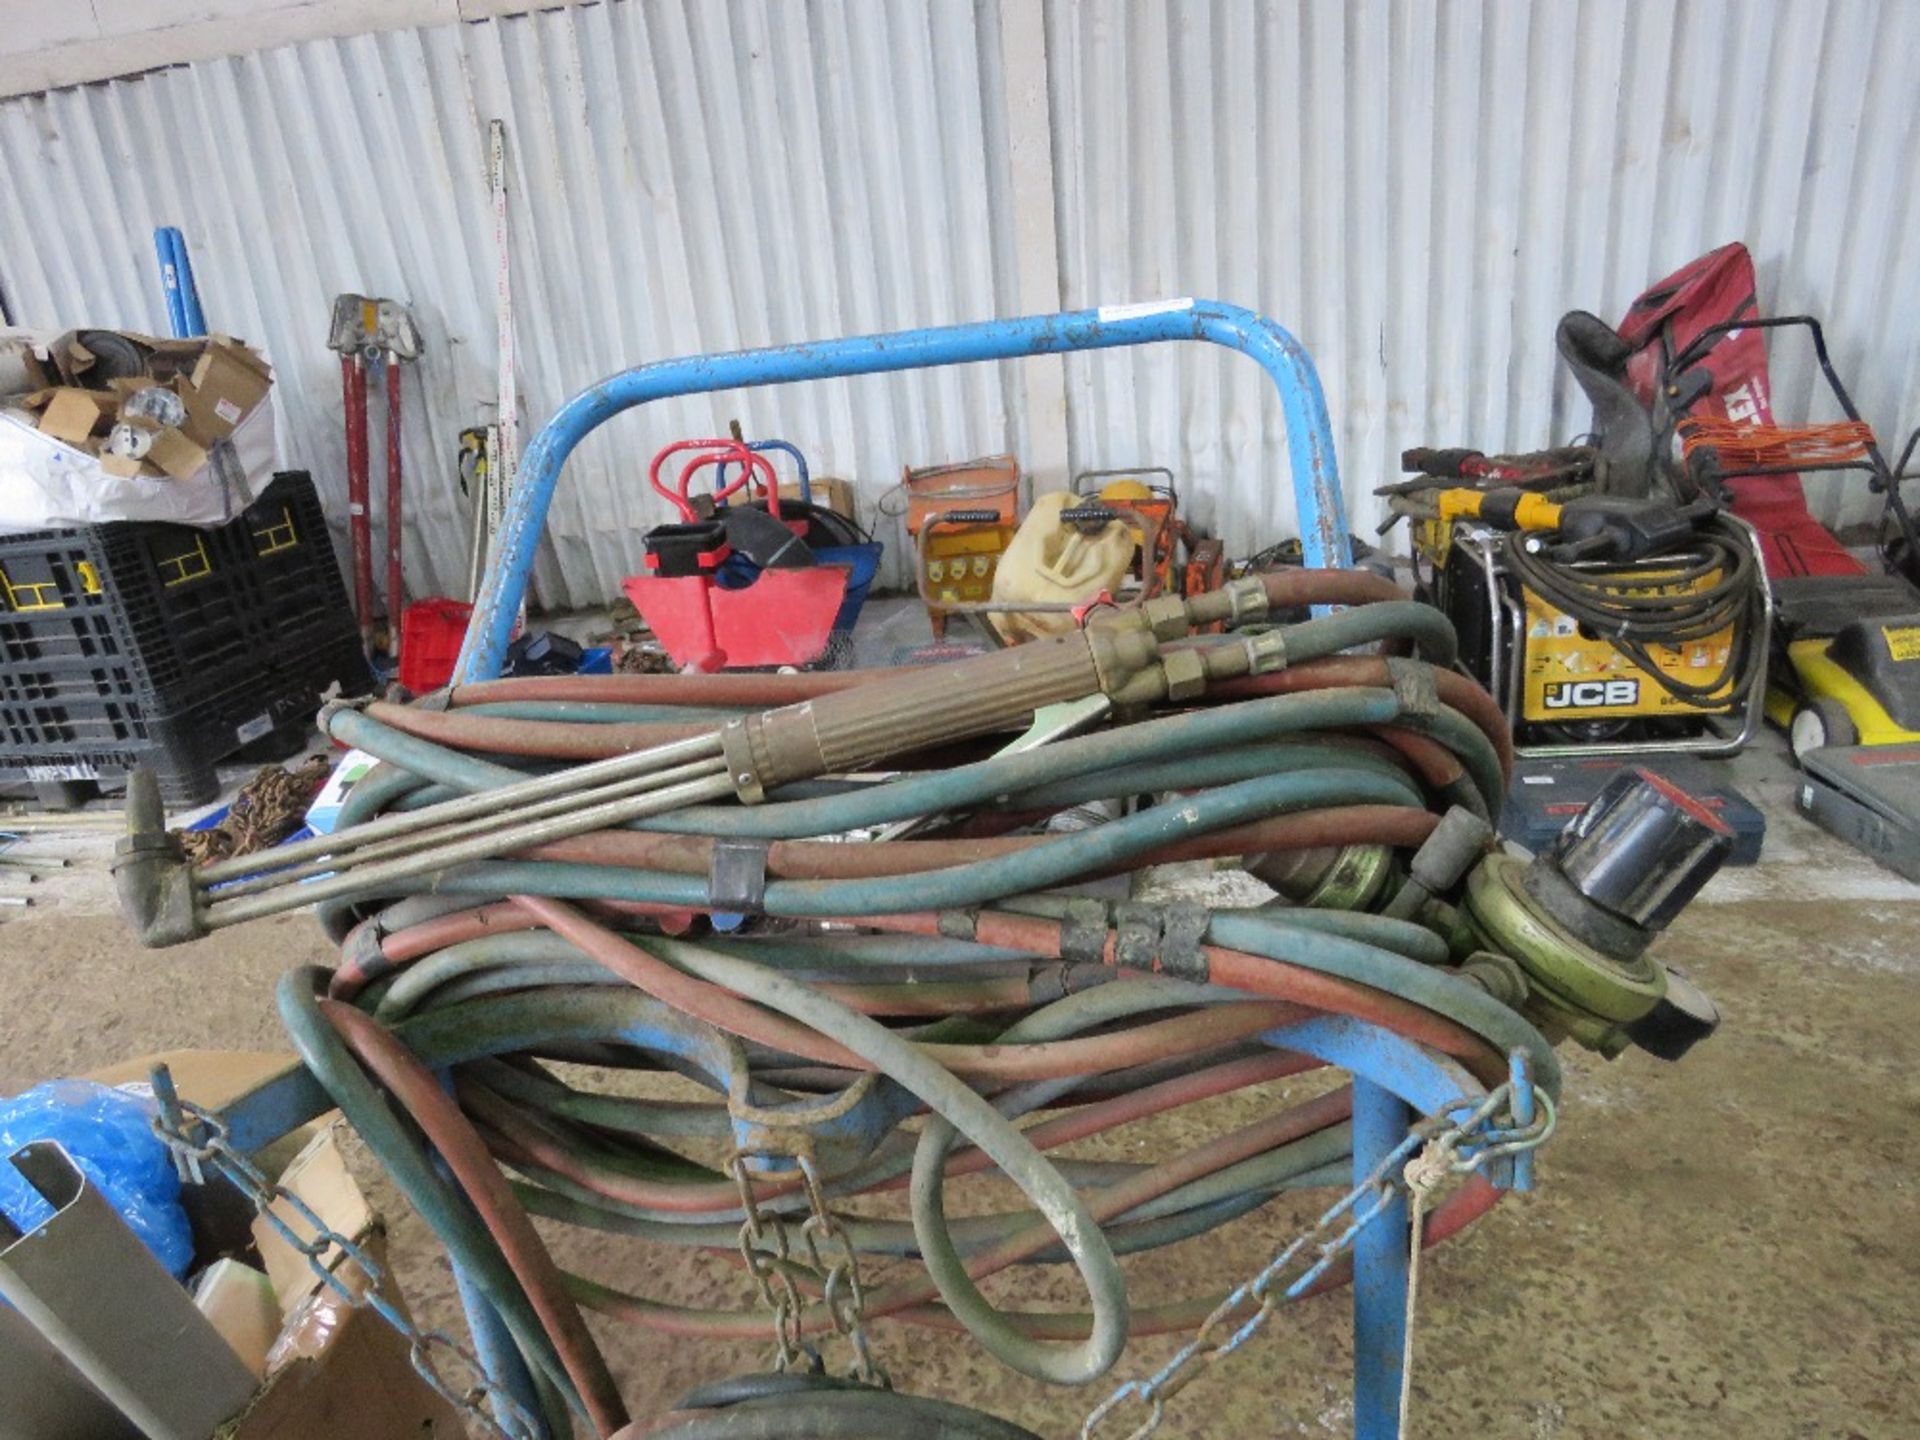 2 X SETS OF OXY-ACETELENE GAS HOSES PLUS A BARROW.....THIS LOT IS SOLD UNDER THE AUCTIONEERS MARGIN - Image 6 of 7